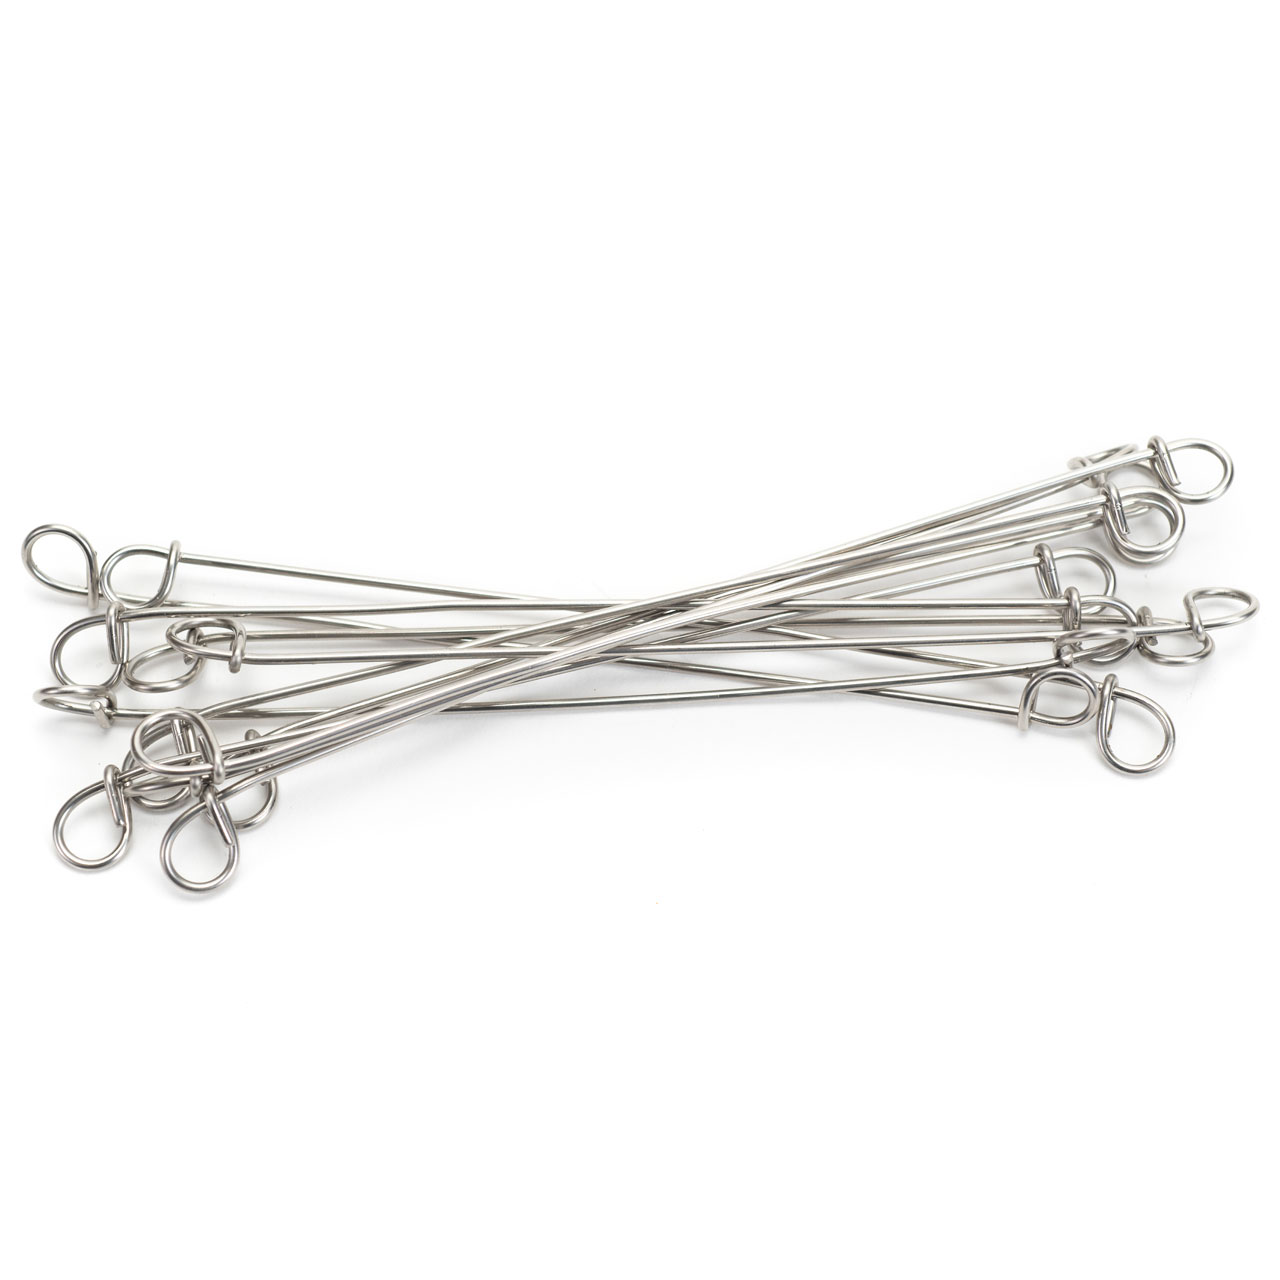 Stainless Steel Wire Ties – American Wire Tie